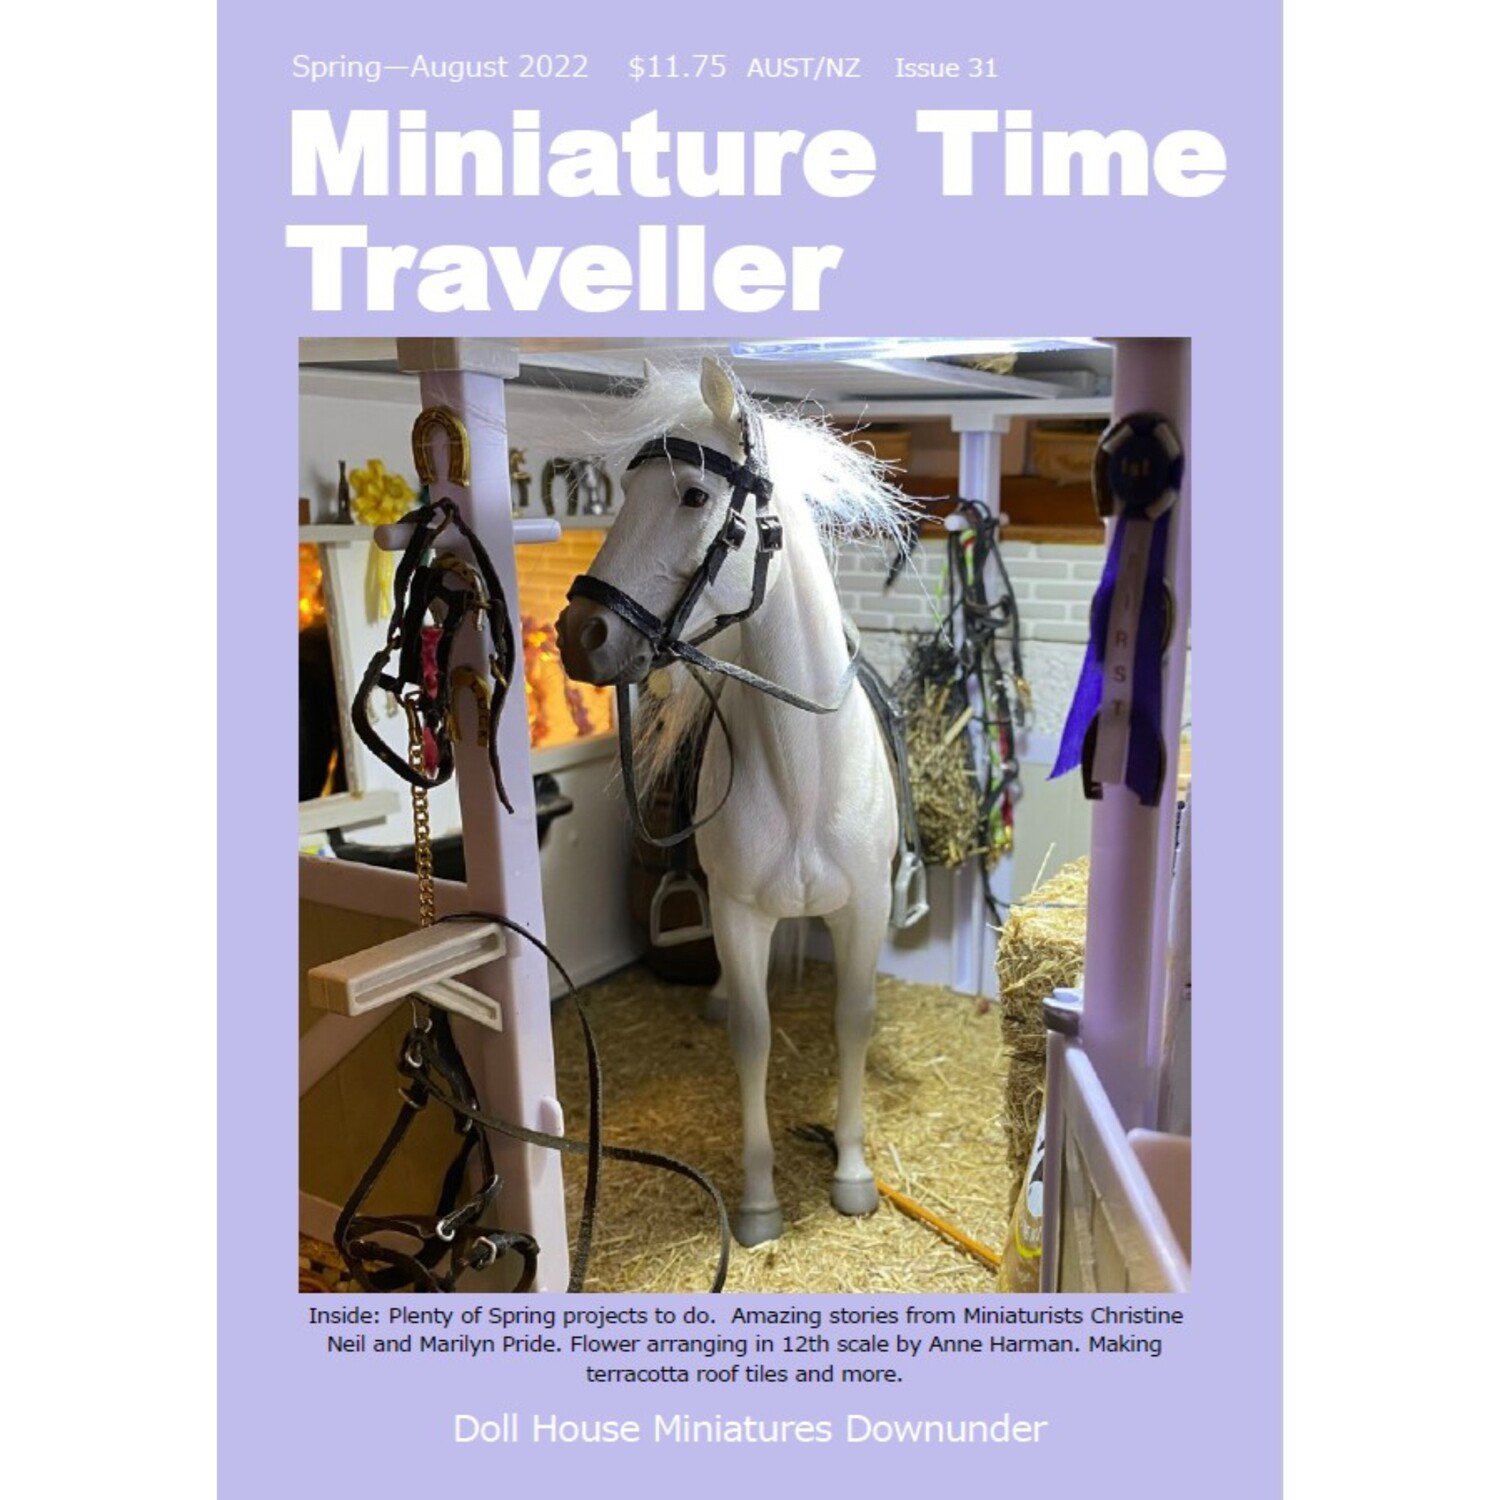 AUGUST 2022 Miniature Time Traveller Magazine - Issue 31 - Single copy. P&P extra.